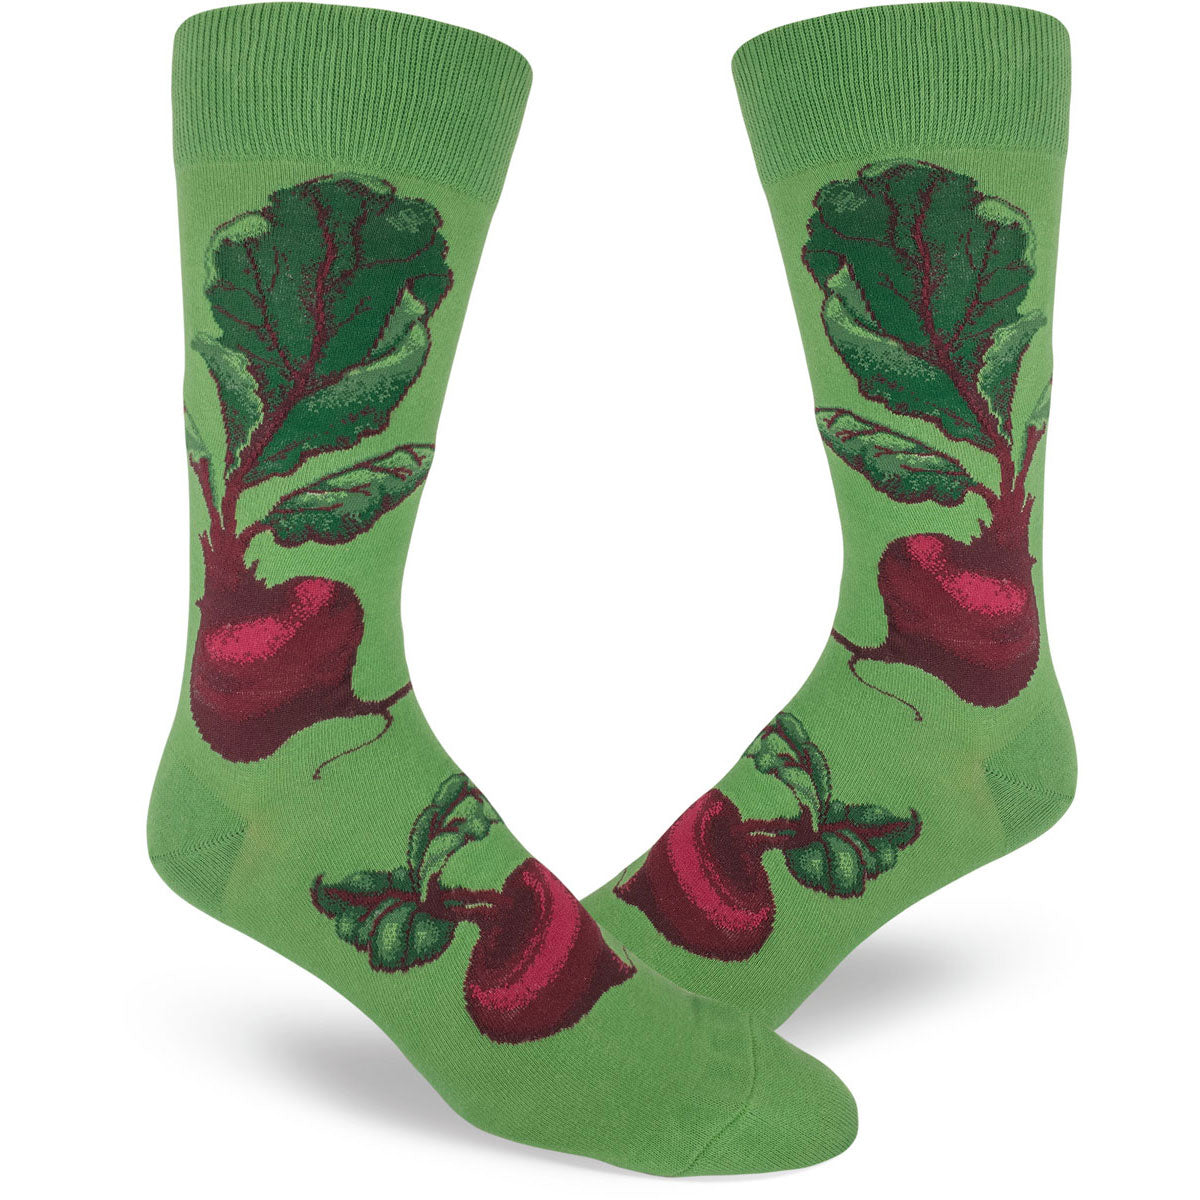 Men's socks with beets